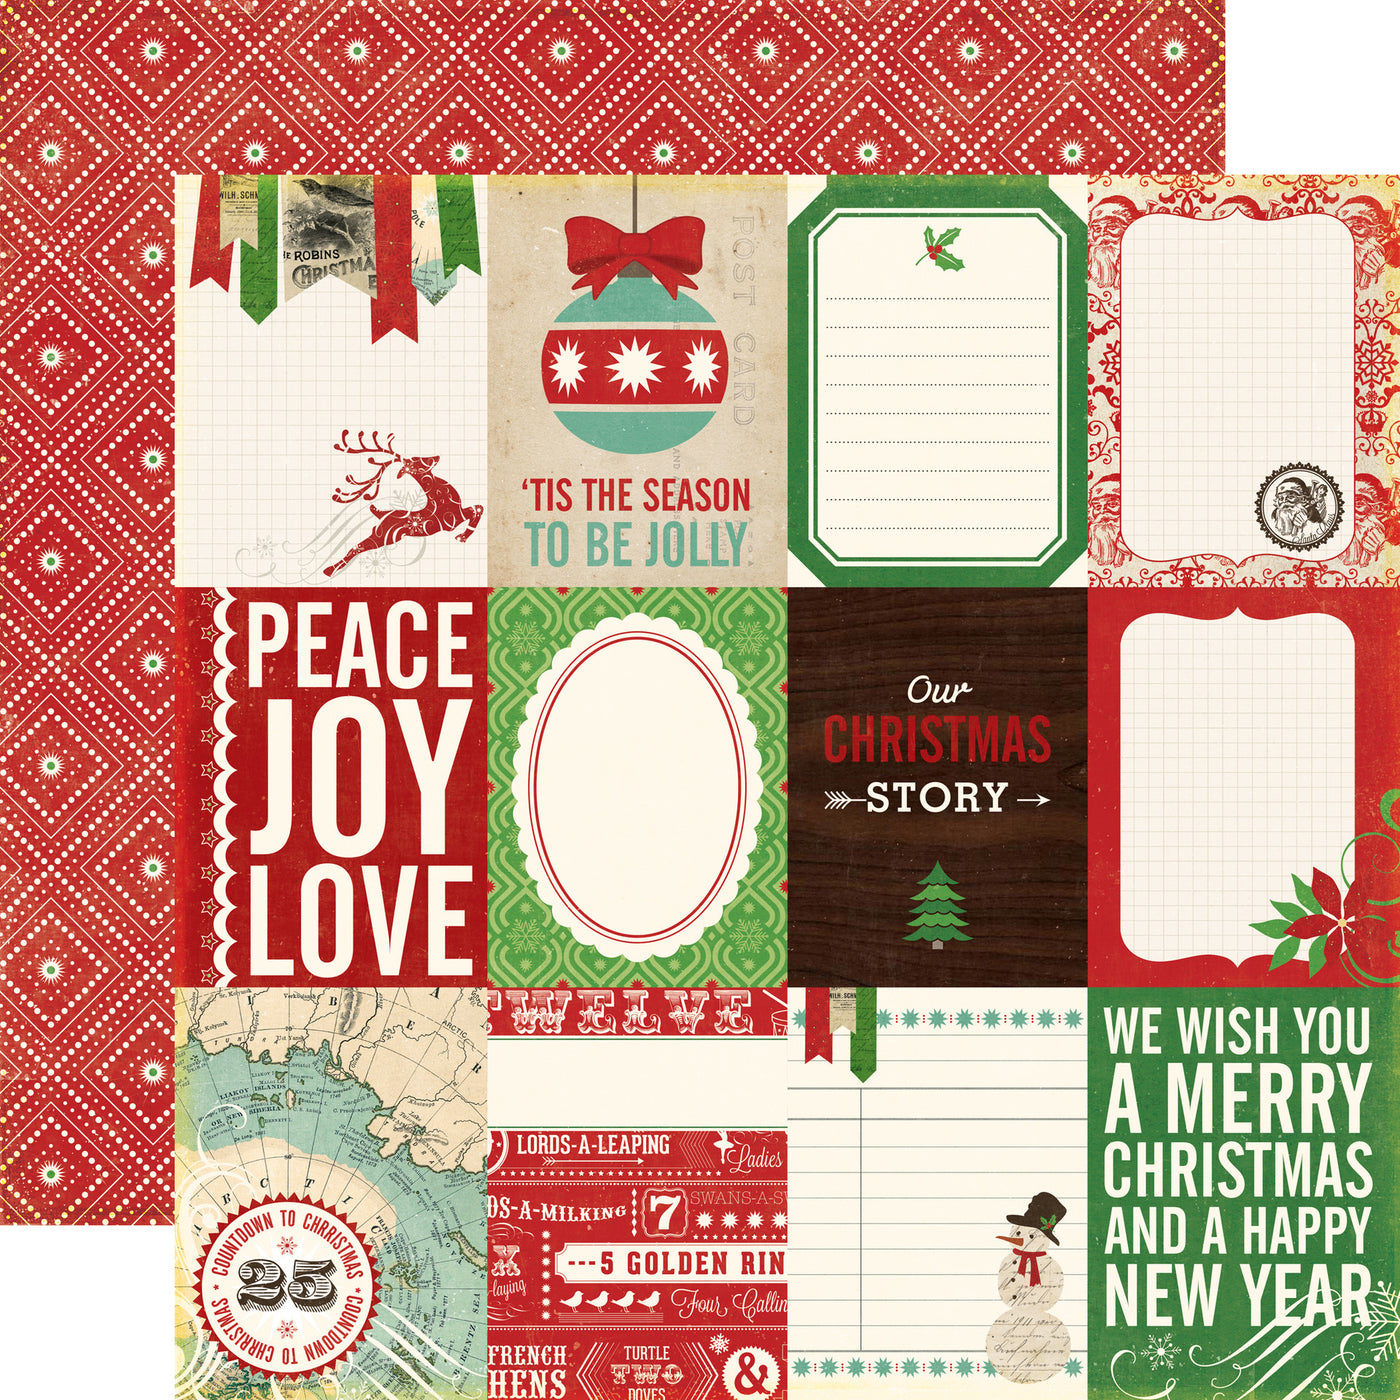 (Side A - Christmas journaling cards and phrases on an off-white background, Side B - white diamond pattern on a red background). Archival safe.